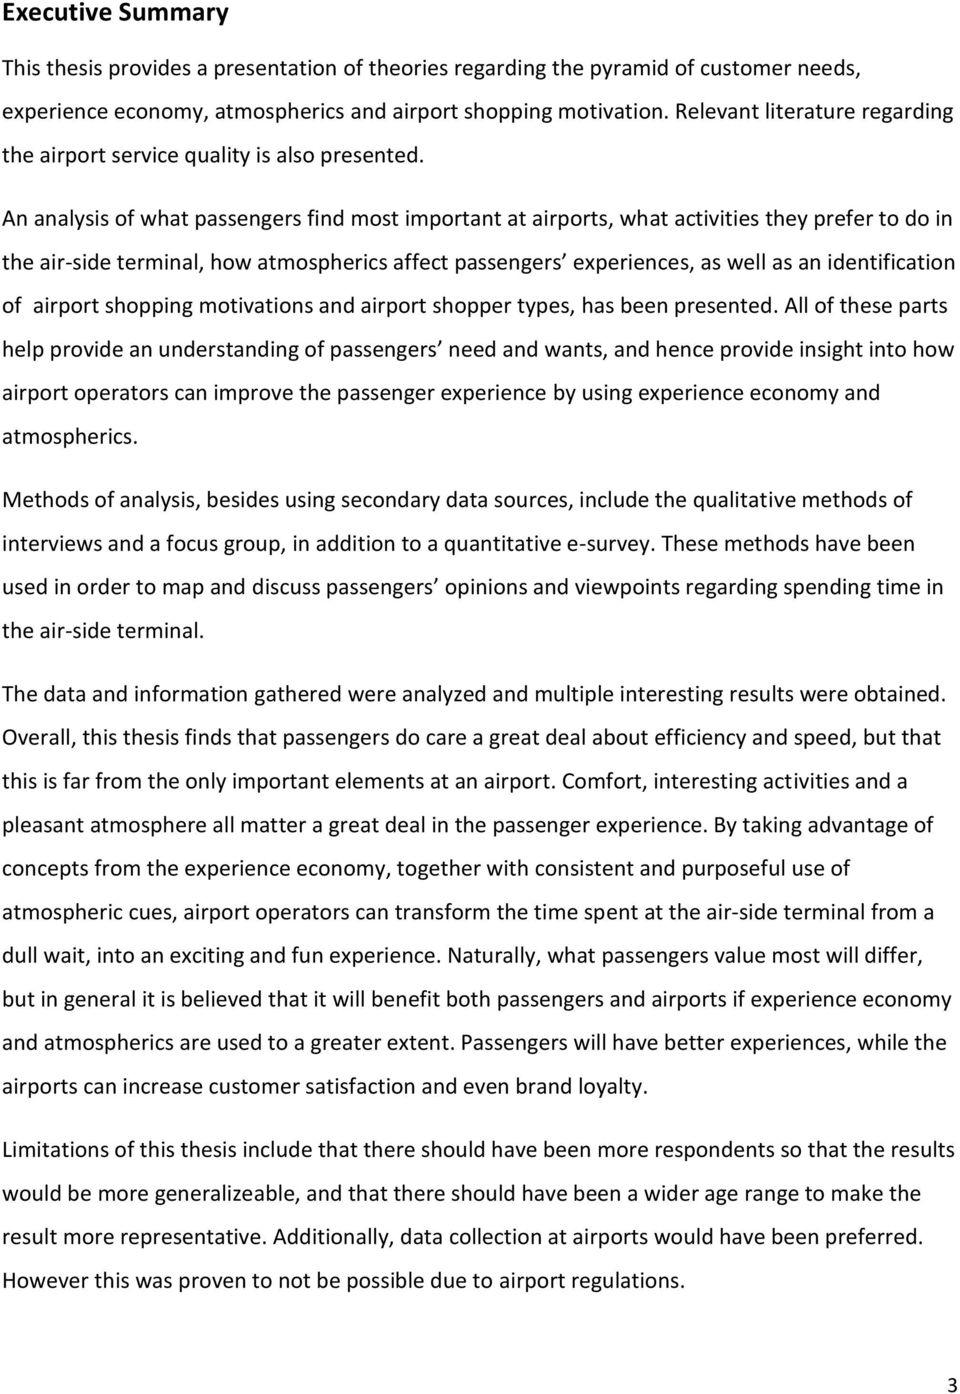 An analysis of what passengers find most important at airports, what activities they prefer to do in the air-side terminal, how atmospherics affect passengers experiences, as well as an